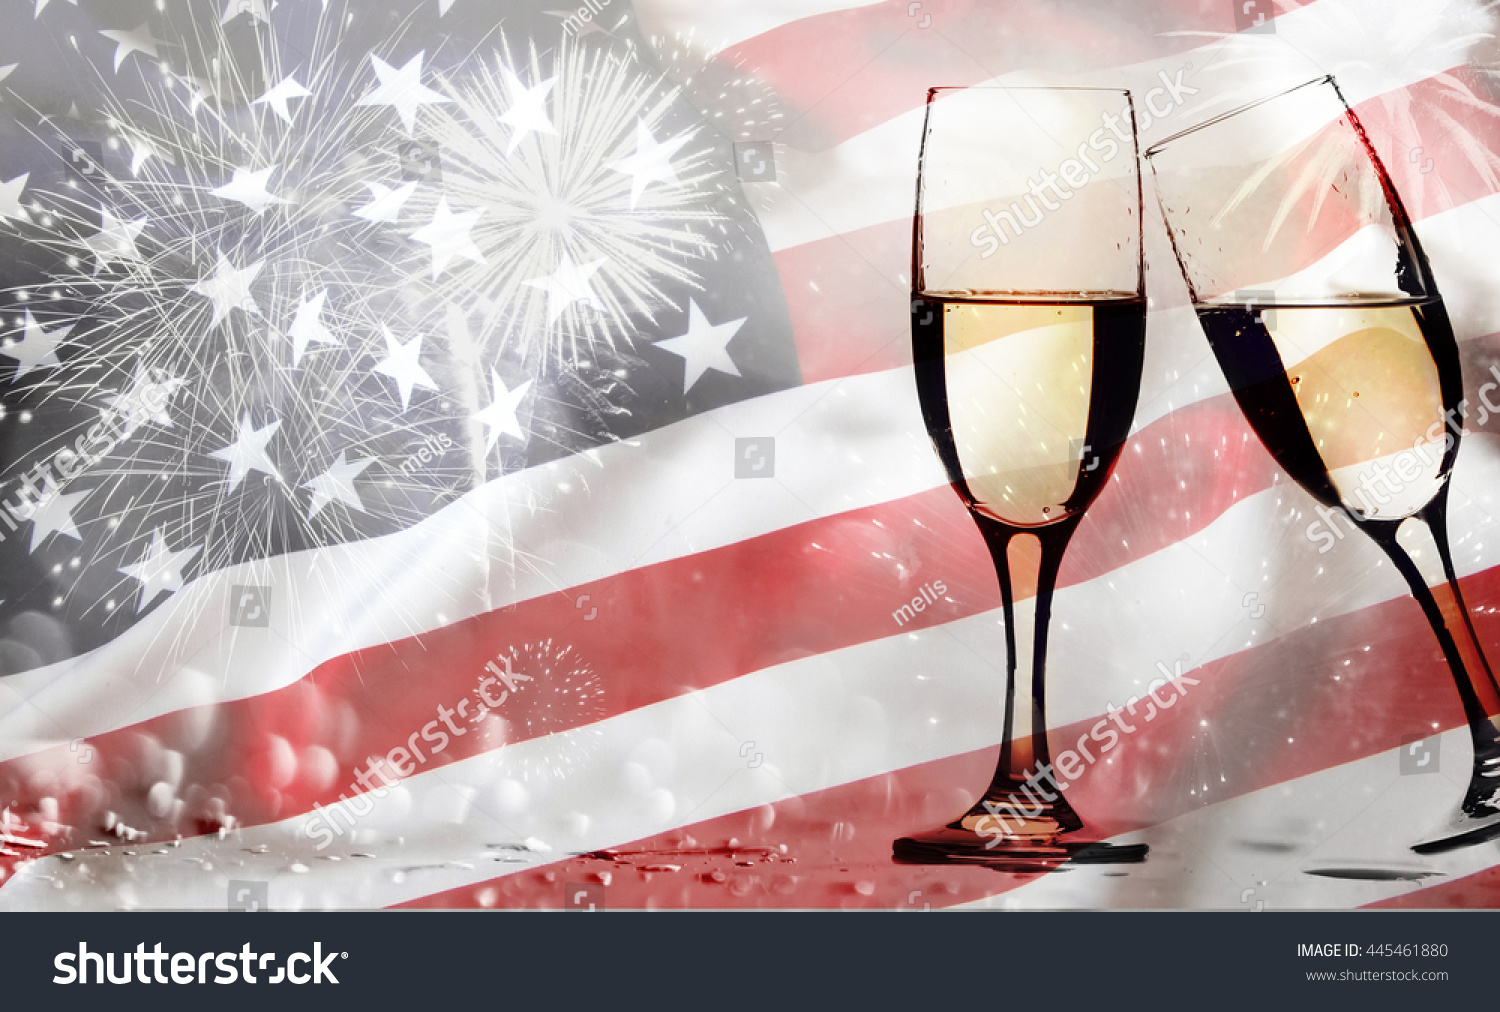 stock-photo-celebrating-independence-day-with-champagne-united-states-of-america-usa-flag-with-fireworks-445461880.jpg